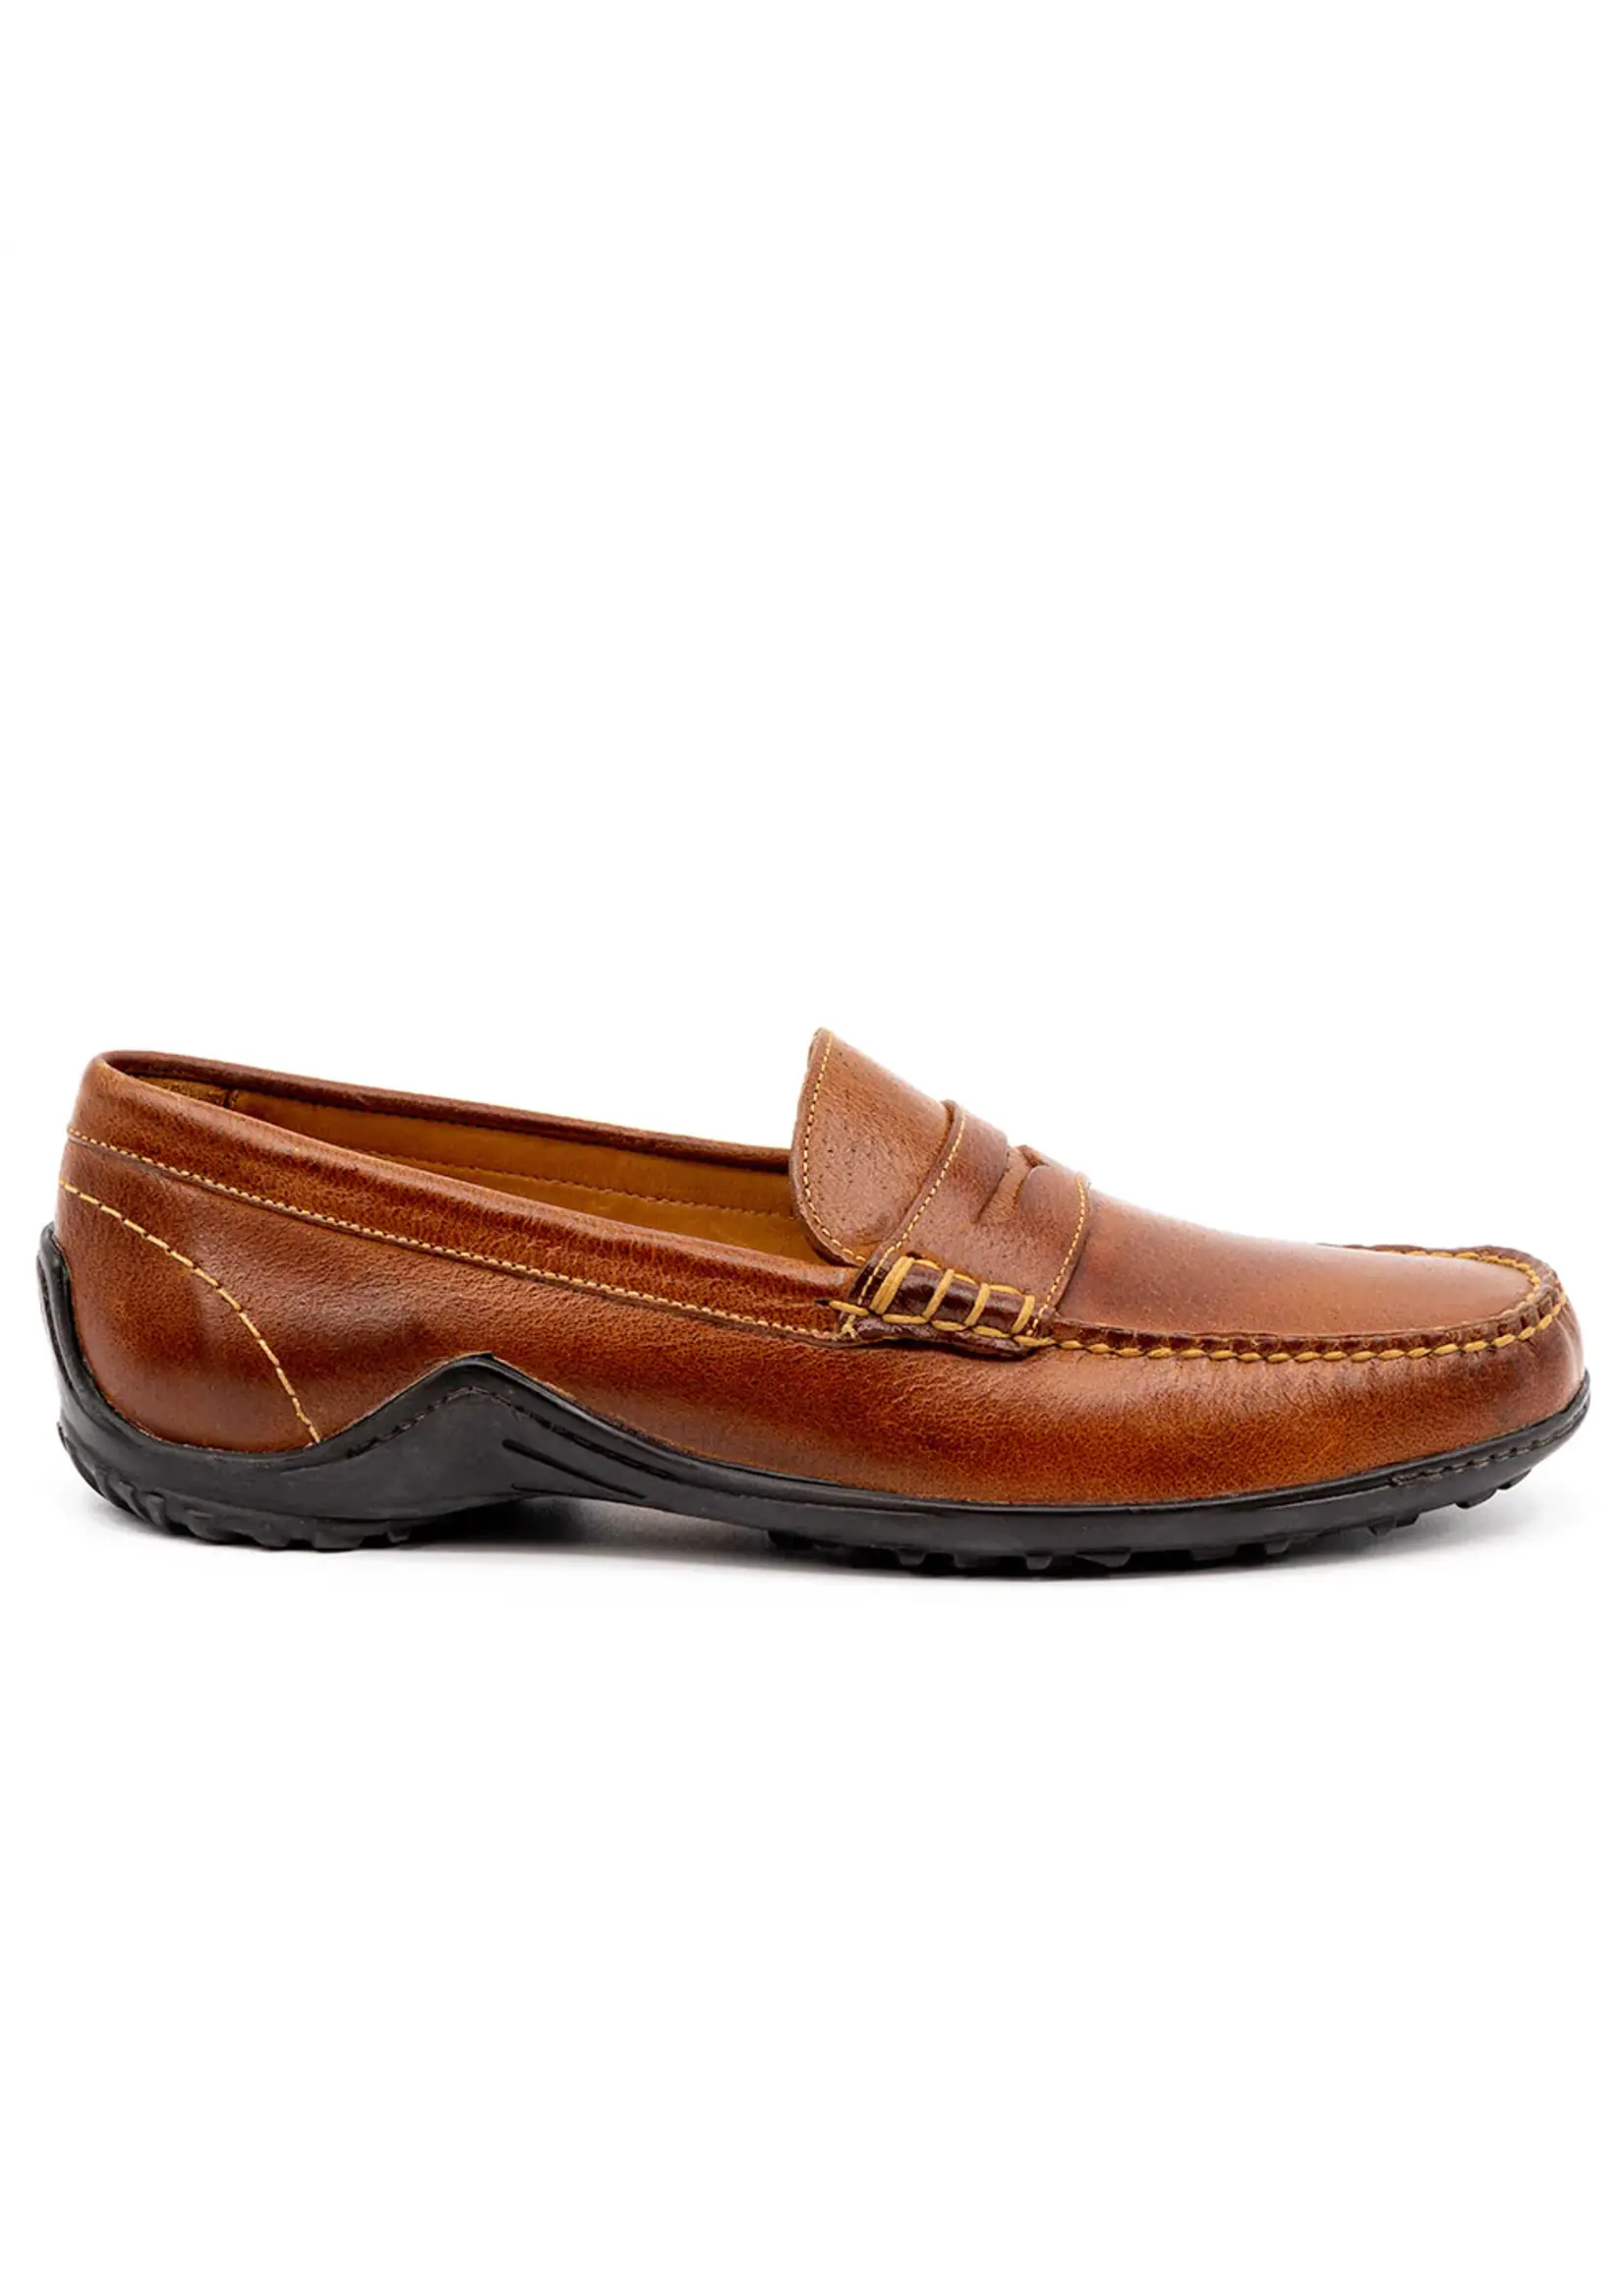 Martin Dingman Bill Leather Penny Loafer